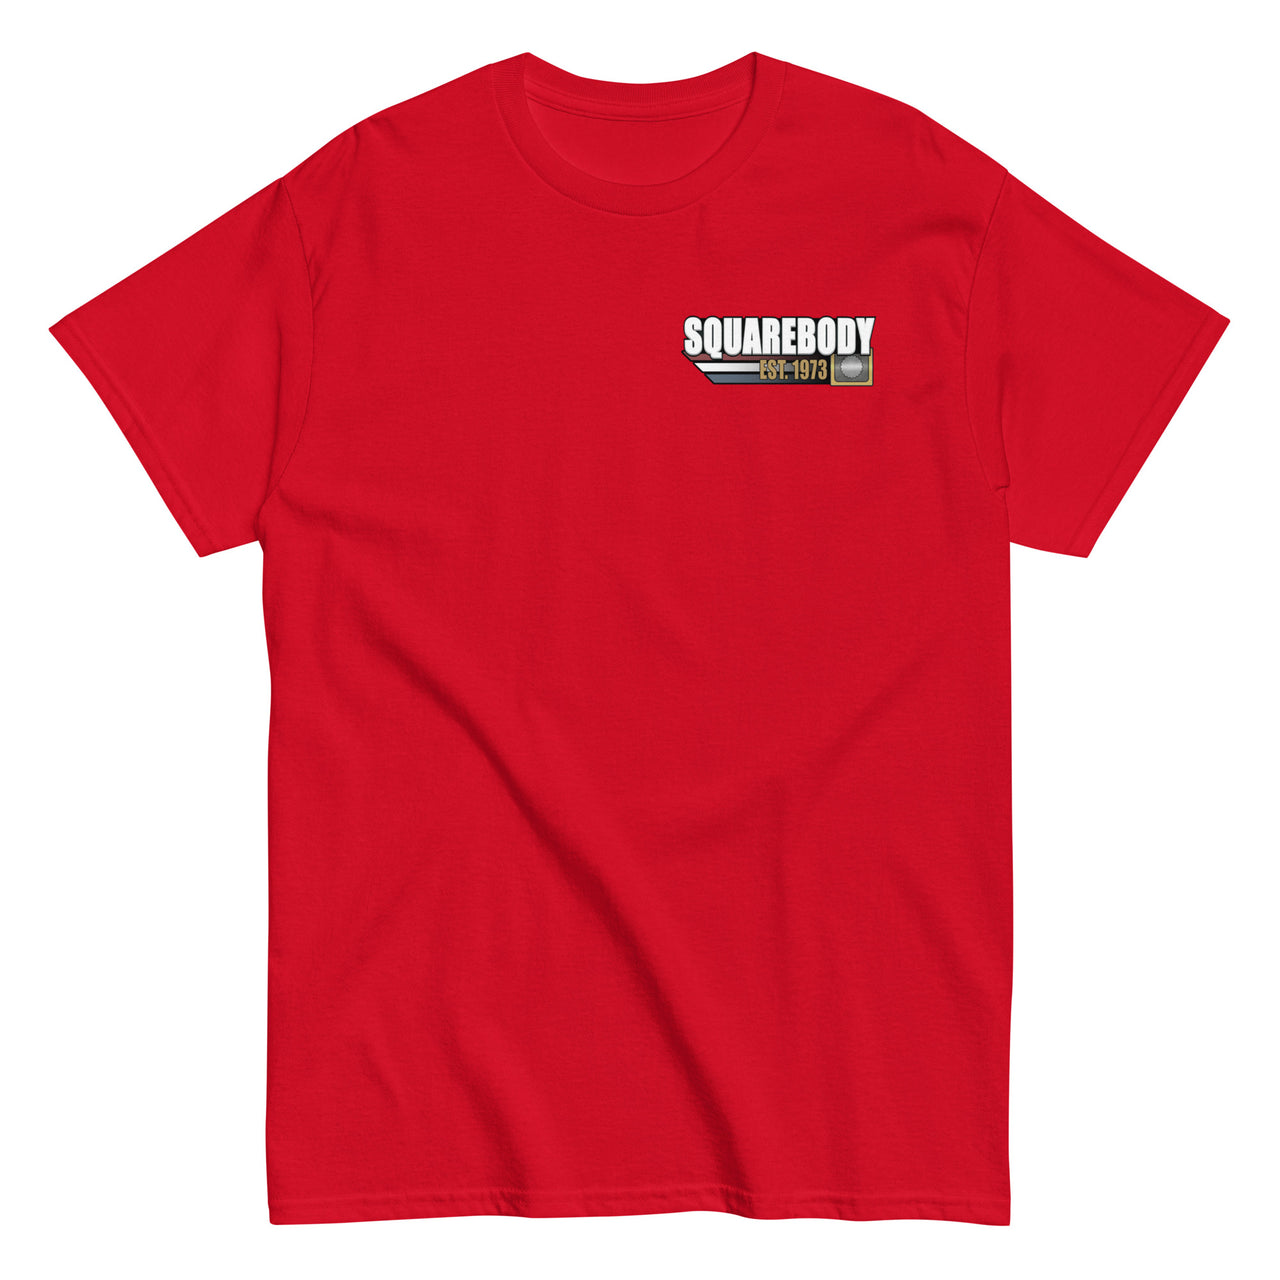 Square Body Truck T-Shirt Squarebody Est 1973 T-Shirt in red